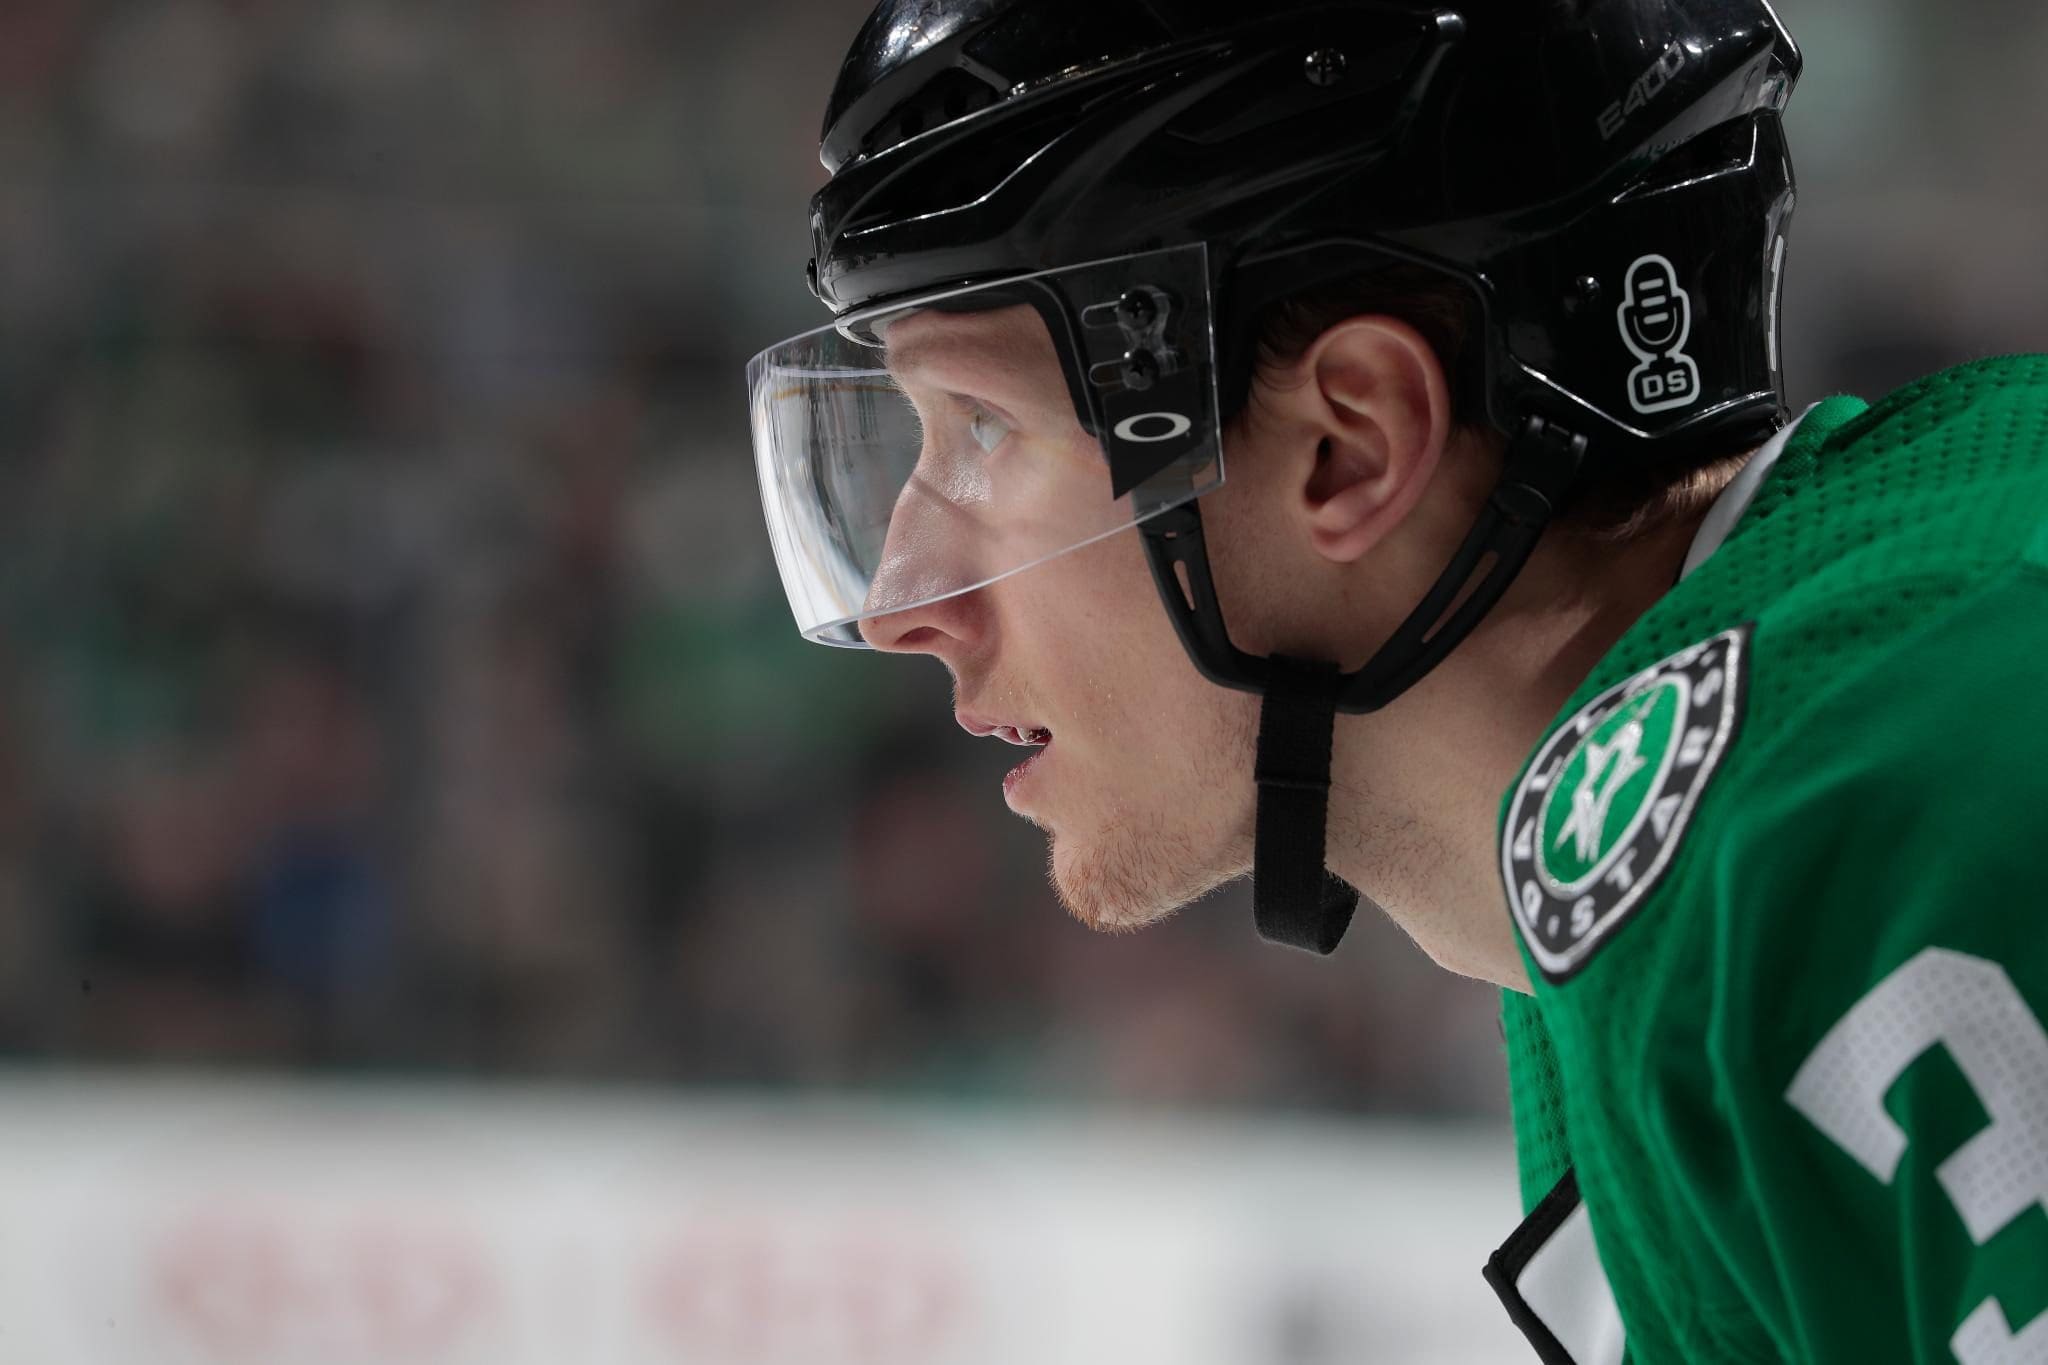 Playing Team First Hockey Has Led To The 2019-20 Dallas Stars Success